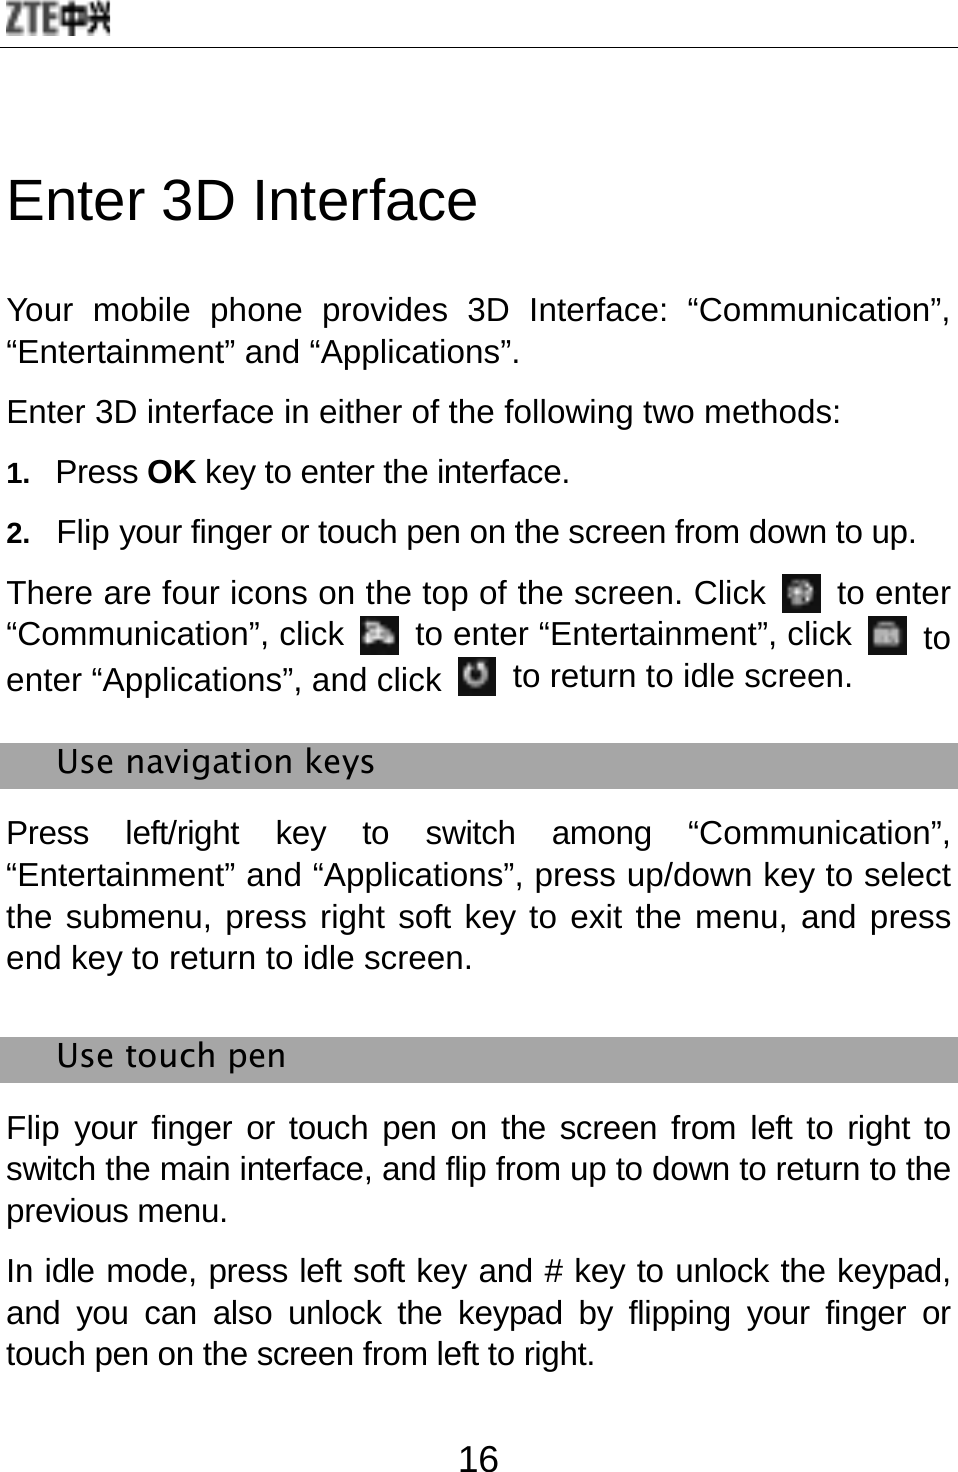  16 Enter 3D Interface Your mobile phone provides 3D Interface: “Communication”, “Entertainment” and “Applications”.   Enter 3D interface in either of the following two methods:   1.  Press OK key to enter the interface. 2.   Flip your finger or touch pen on the screen from down to up. There are four icons on the top of the screen. Click   to enter “Communication”, click   to enter “Entertainment”, click   to enter “Applications”, and click   to return to idle screen. Use navigation keys   Press left/right key to switch among “Communication”, “Entertainment” and “Applications”, press up/down key to select the submenu, press right soft key to exit the menu, and press end key to return to idle screen. Use touch pen   Flip your finger or touch pen on the screen from left to right to switch the main interface, and flip from up to down to return to the previous menu. In idle mode, press left soft key and # key to unlock the keypad, and you can also unlock the keypad by flipping your finger or touch pen on the screen from left to right. 